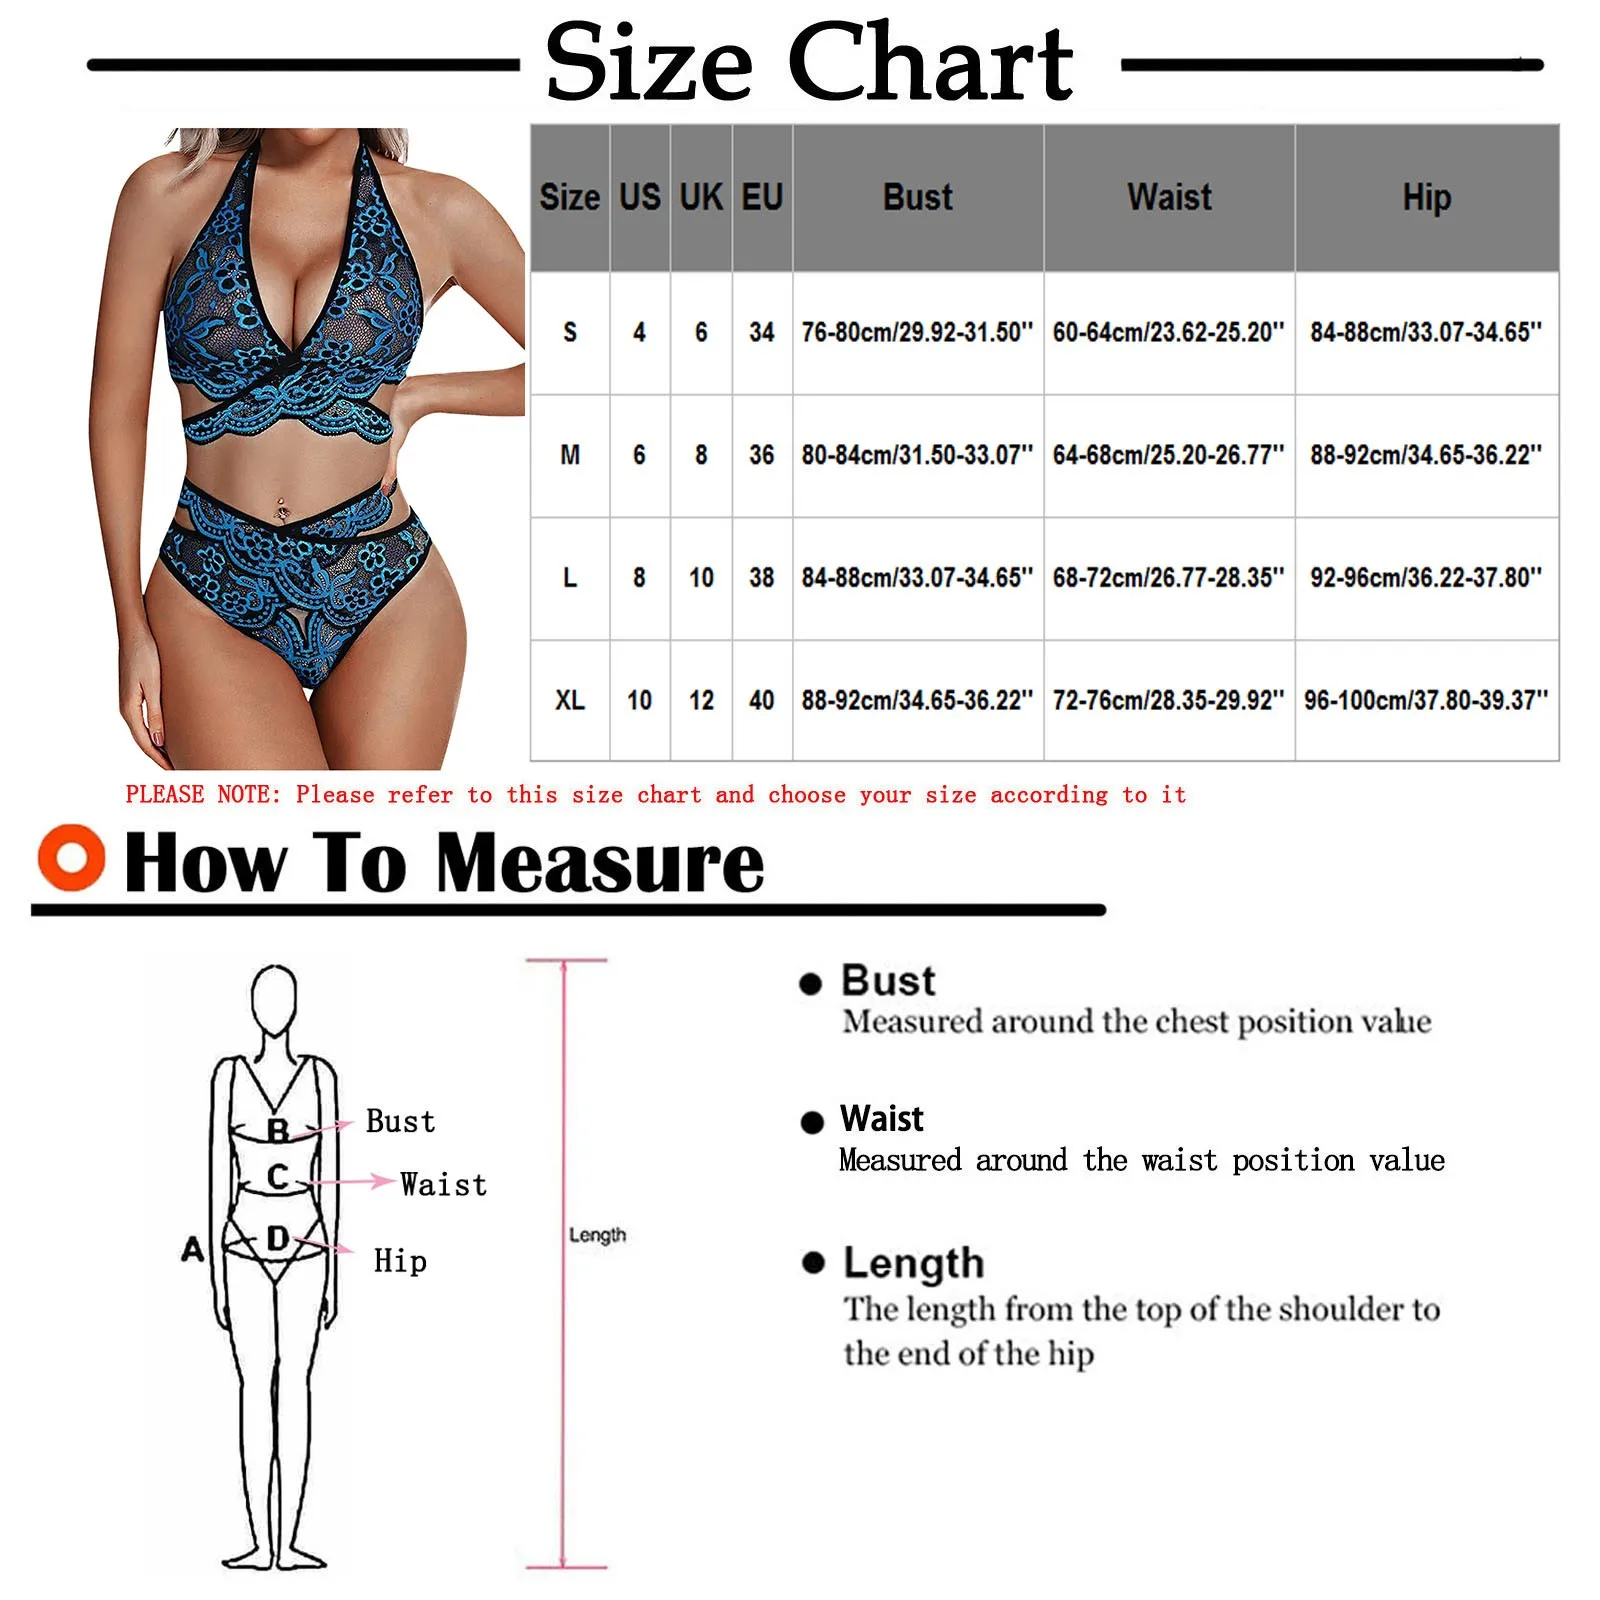 cheap bra and panty sets Women's Sexy Lingerie Set Embroidered Lace Bra And Thong Lingerie High Waist Cross Hollow Out Underwear Mesh Sheer Exotic Sets french knickers set